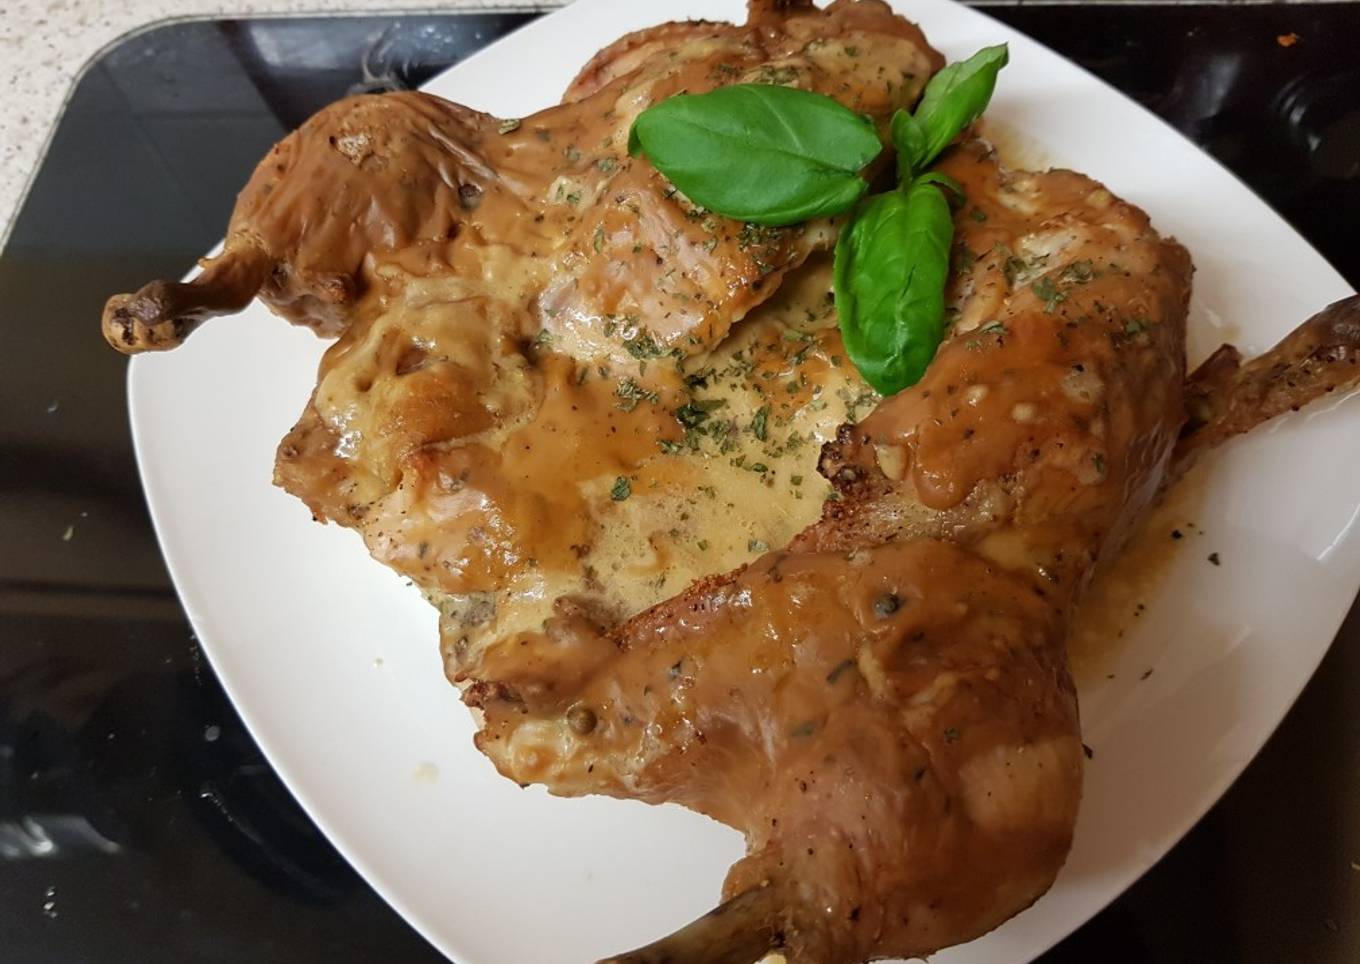 My Roast Spatchcock Chicken with Pepper Sauce.❤